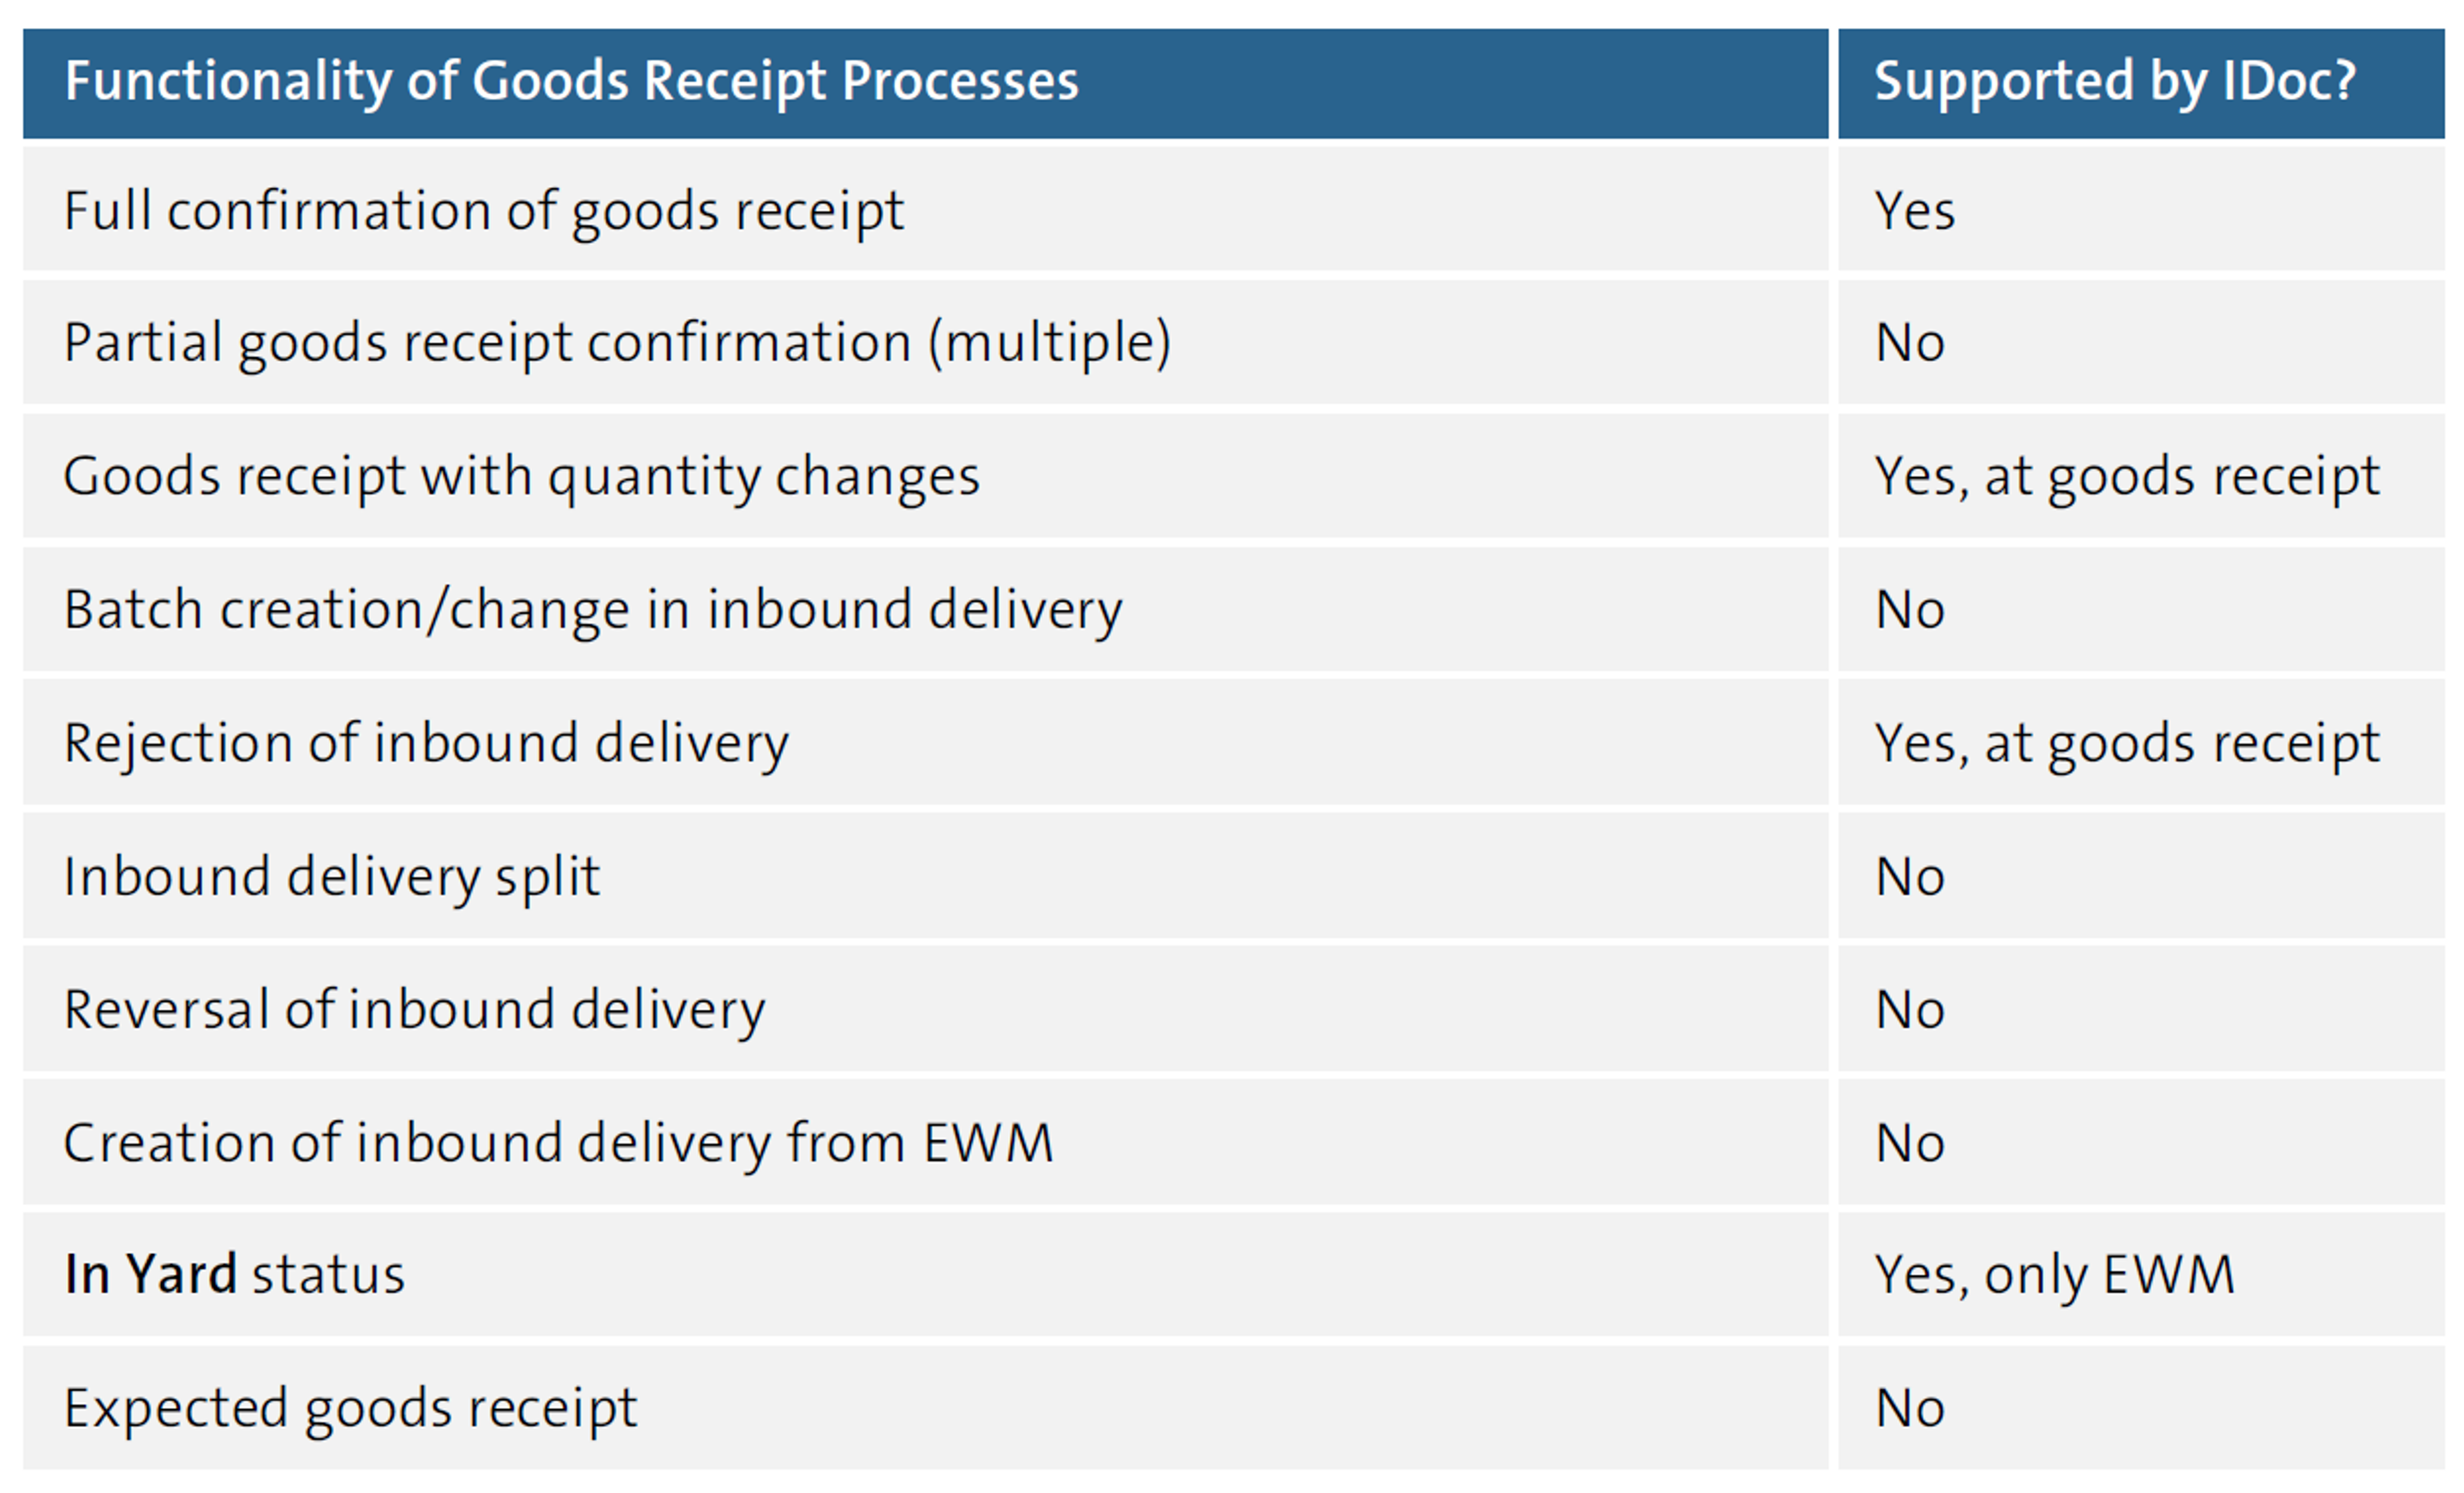 Supported Interface Functionality for Goods Receipts with IDocs